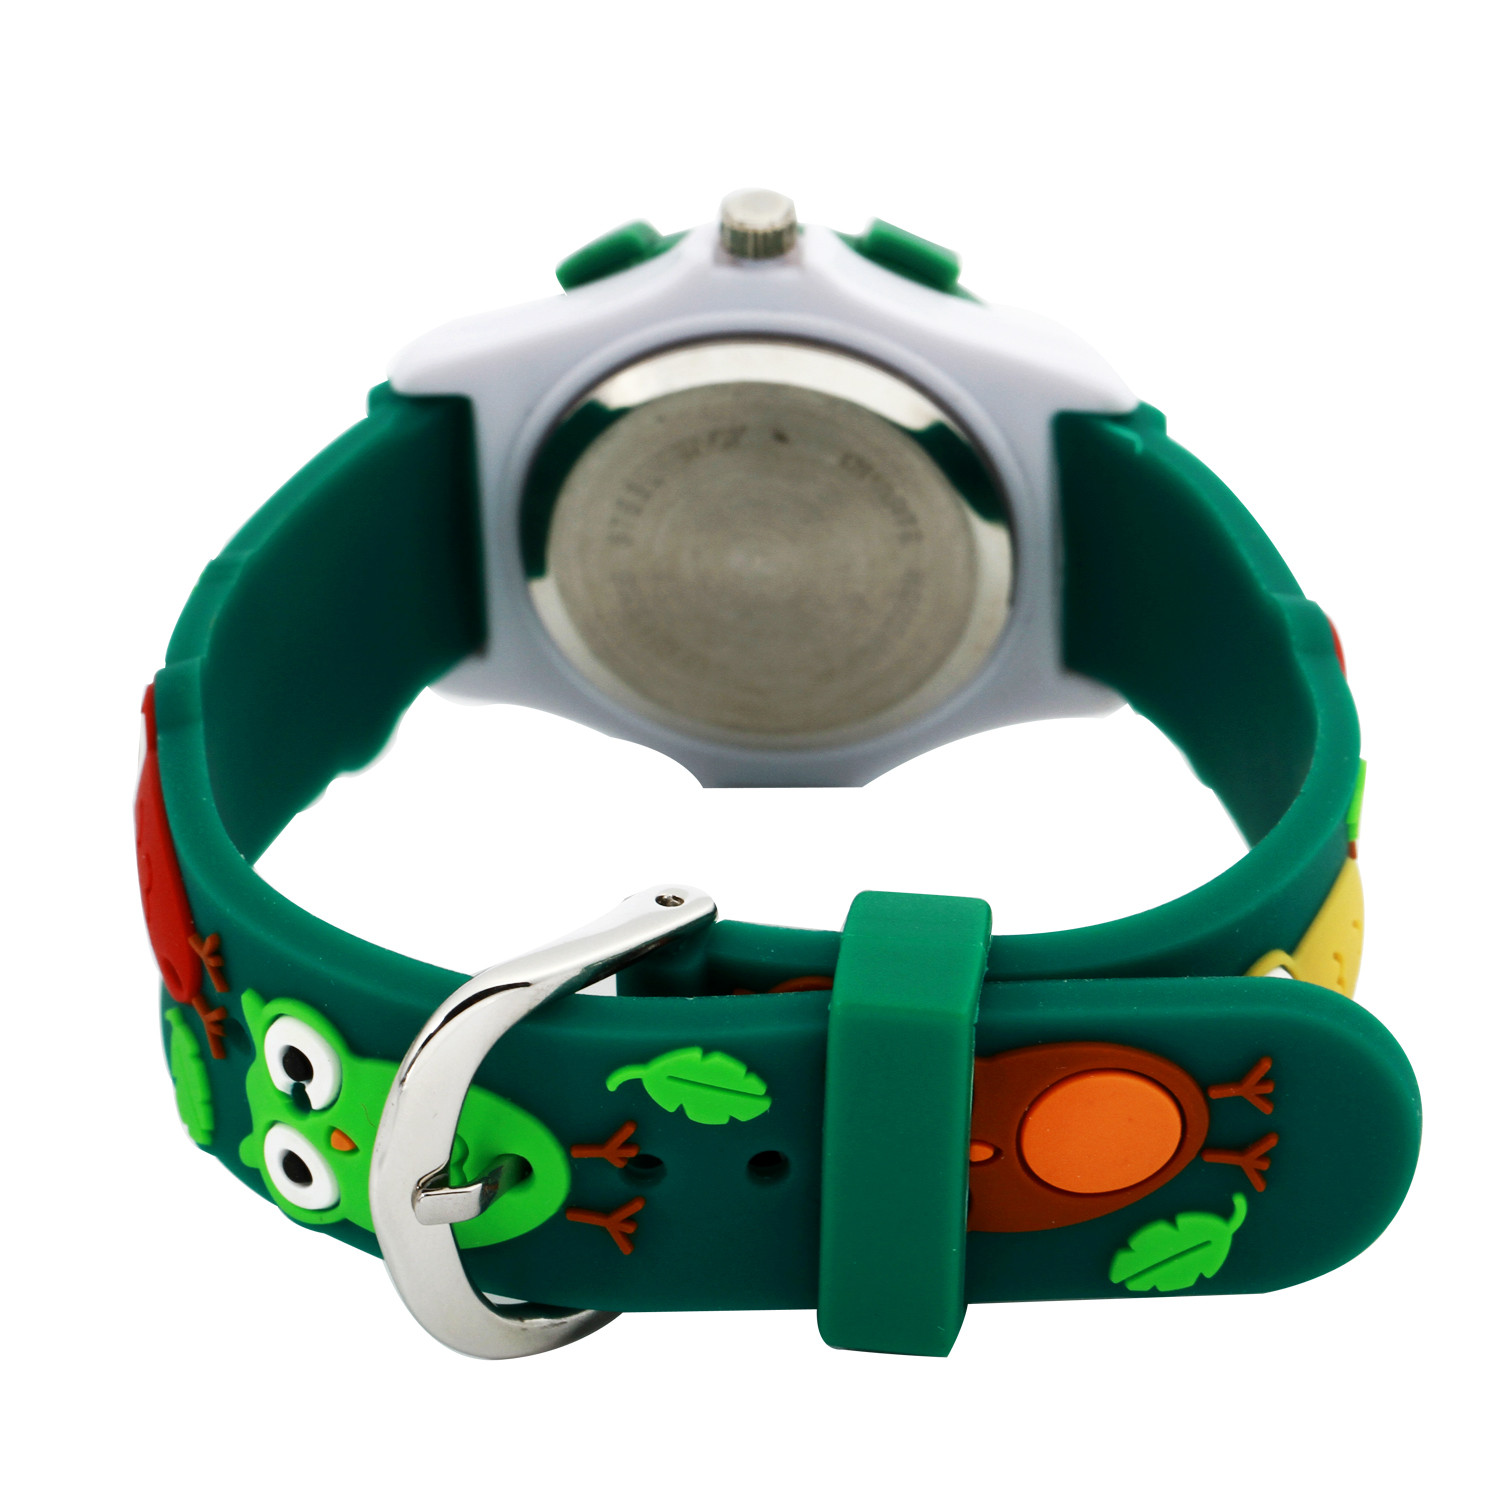 Unisex Gifts For Kids
 2018 New Cartoon Uni Rubber Wrist Watch For Boys Girls